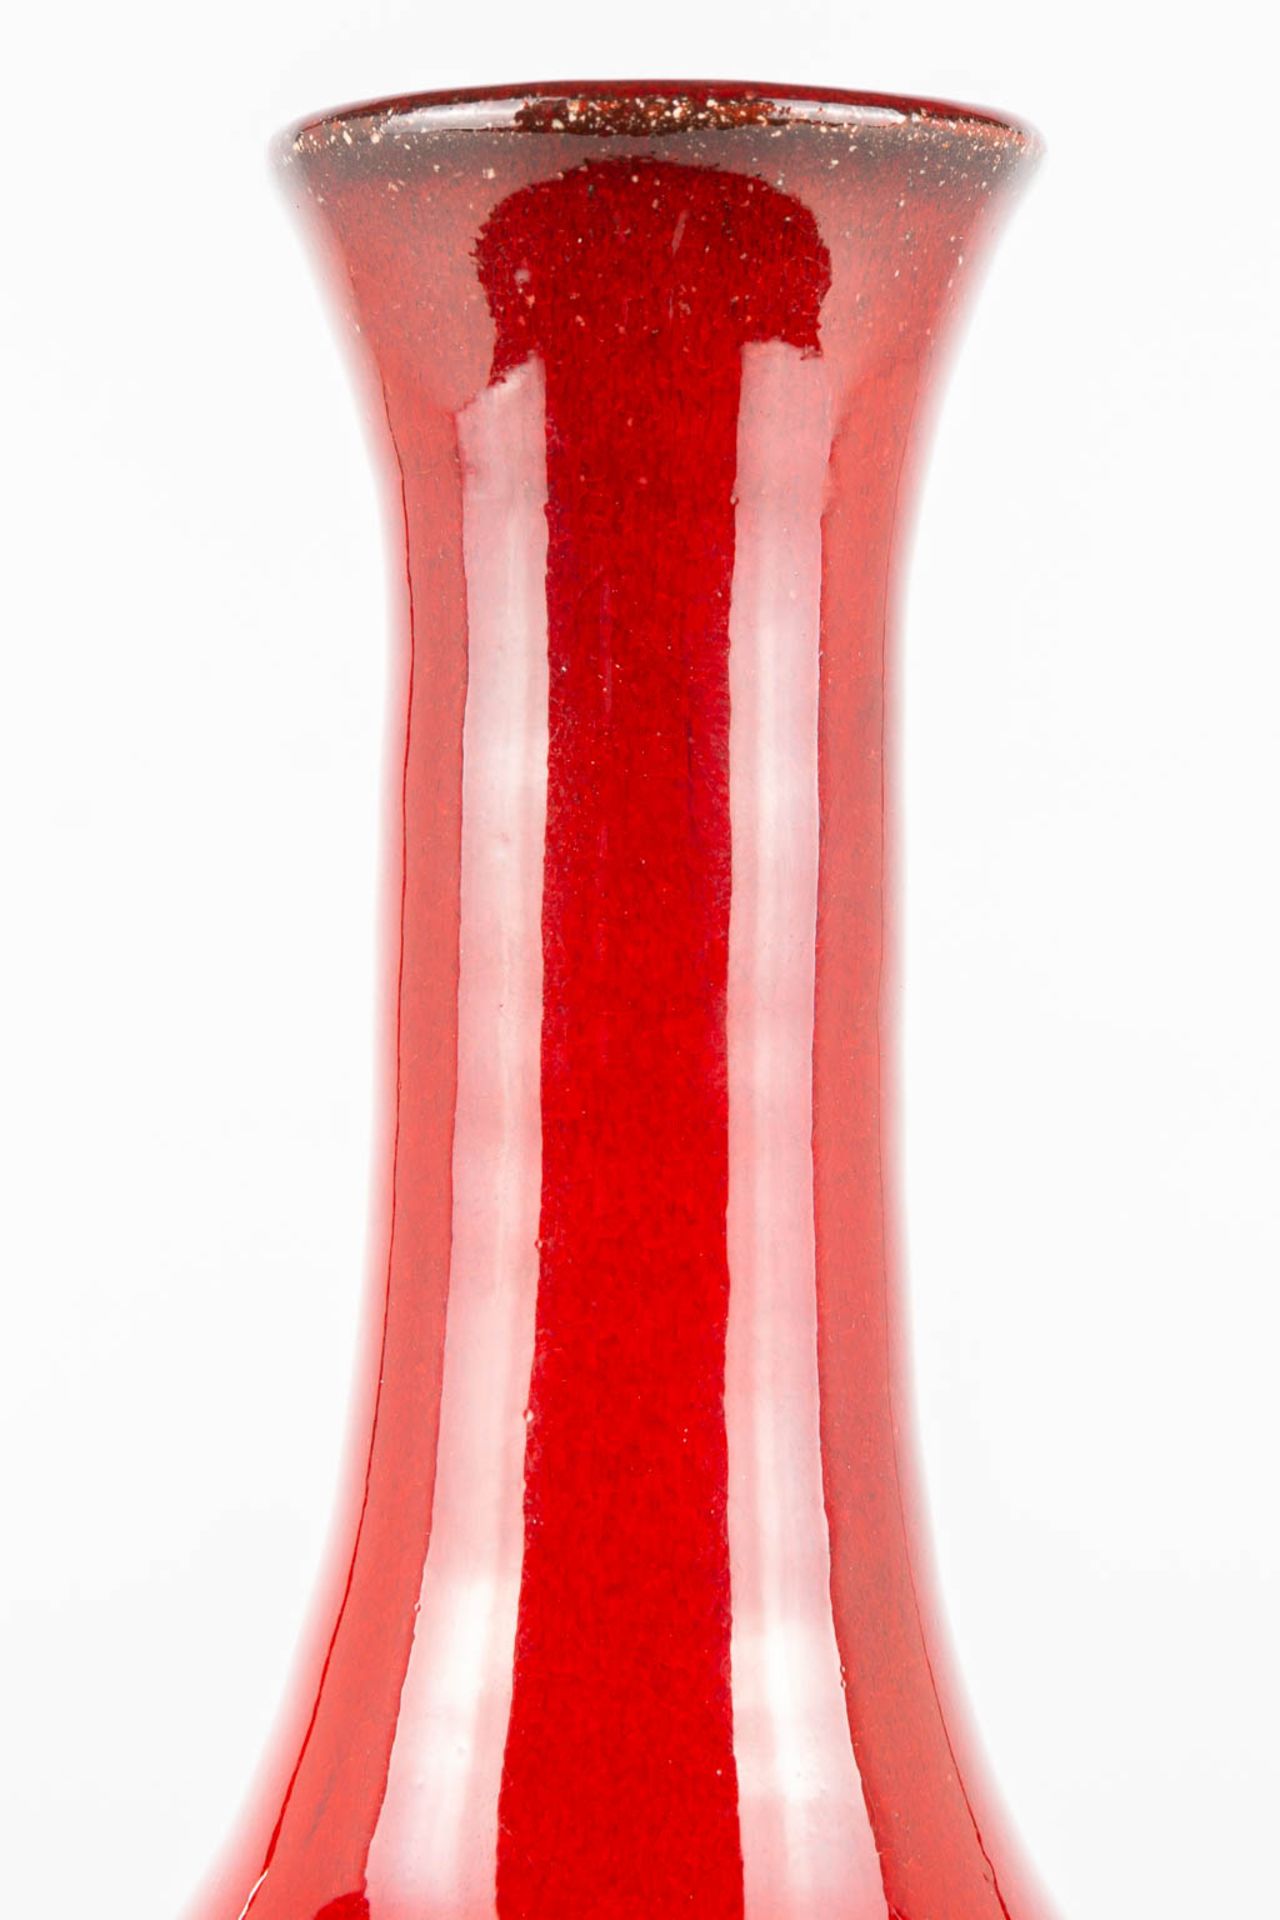 Leon GOOSSENS (XX) A red glazed vase made of ceramics. Not marked. (20 x 11 cm) - Image 6 of 9